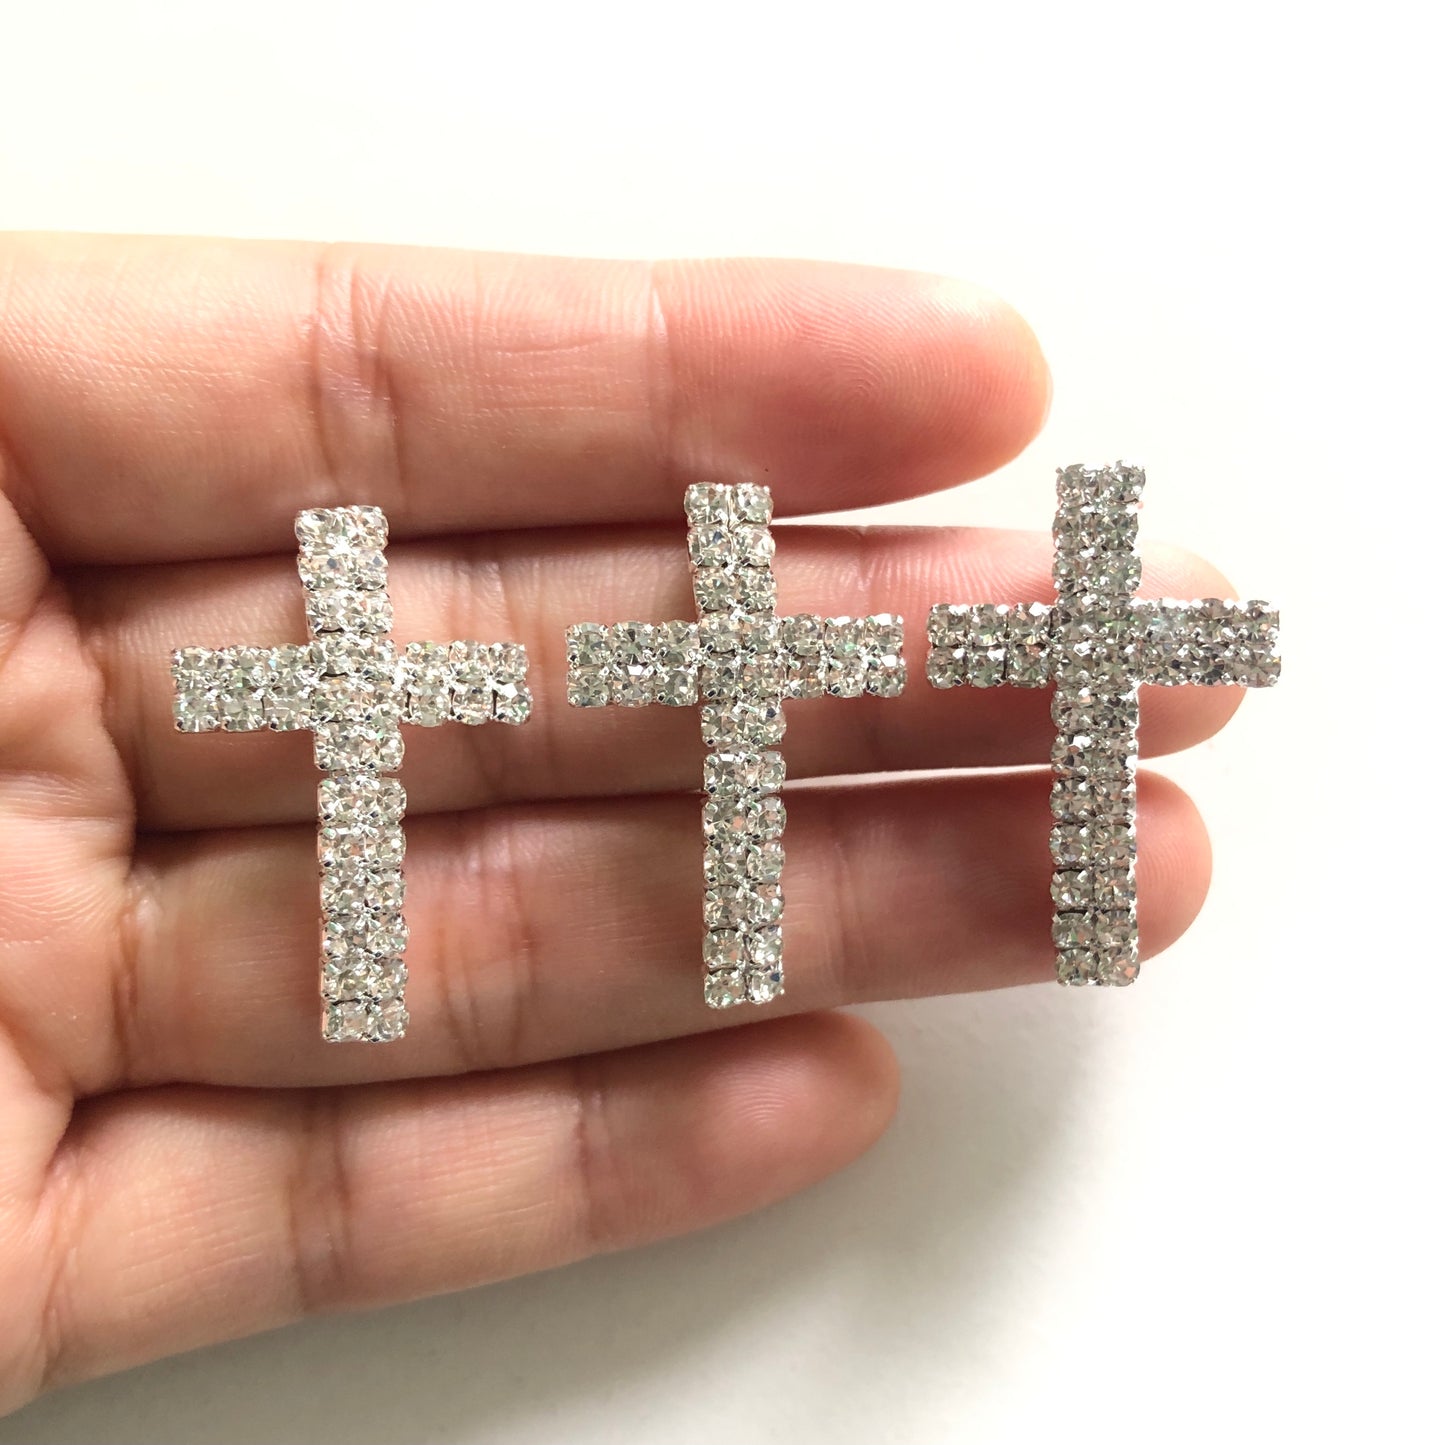 10pcs/lot 30*20mm Clear Rhinestone Paved Alloy Cross Spacers-Silver Alloy Spacers New Spacers Arrivals Charms Beads Beyond